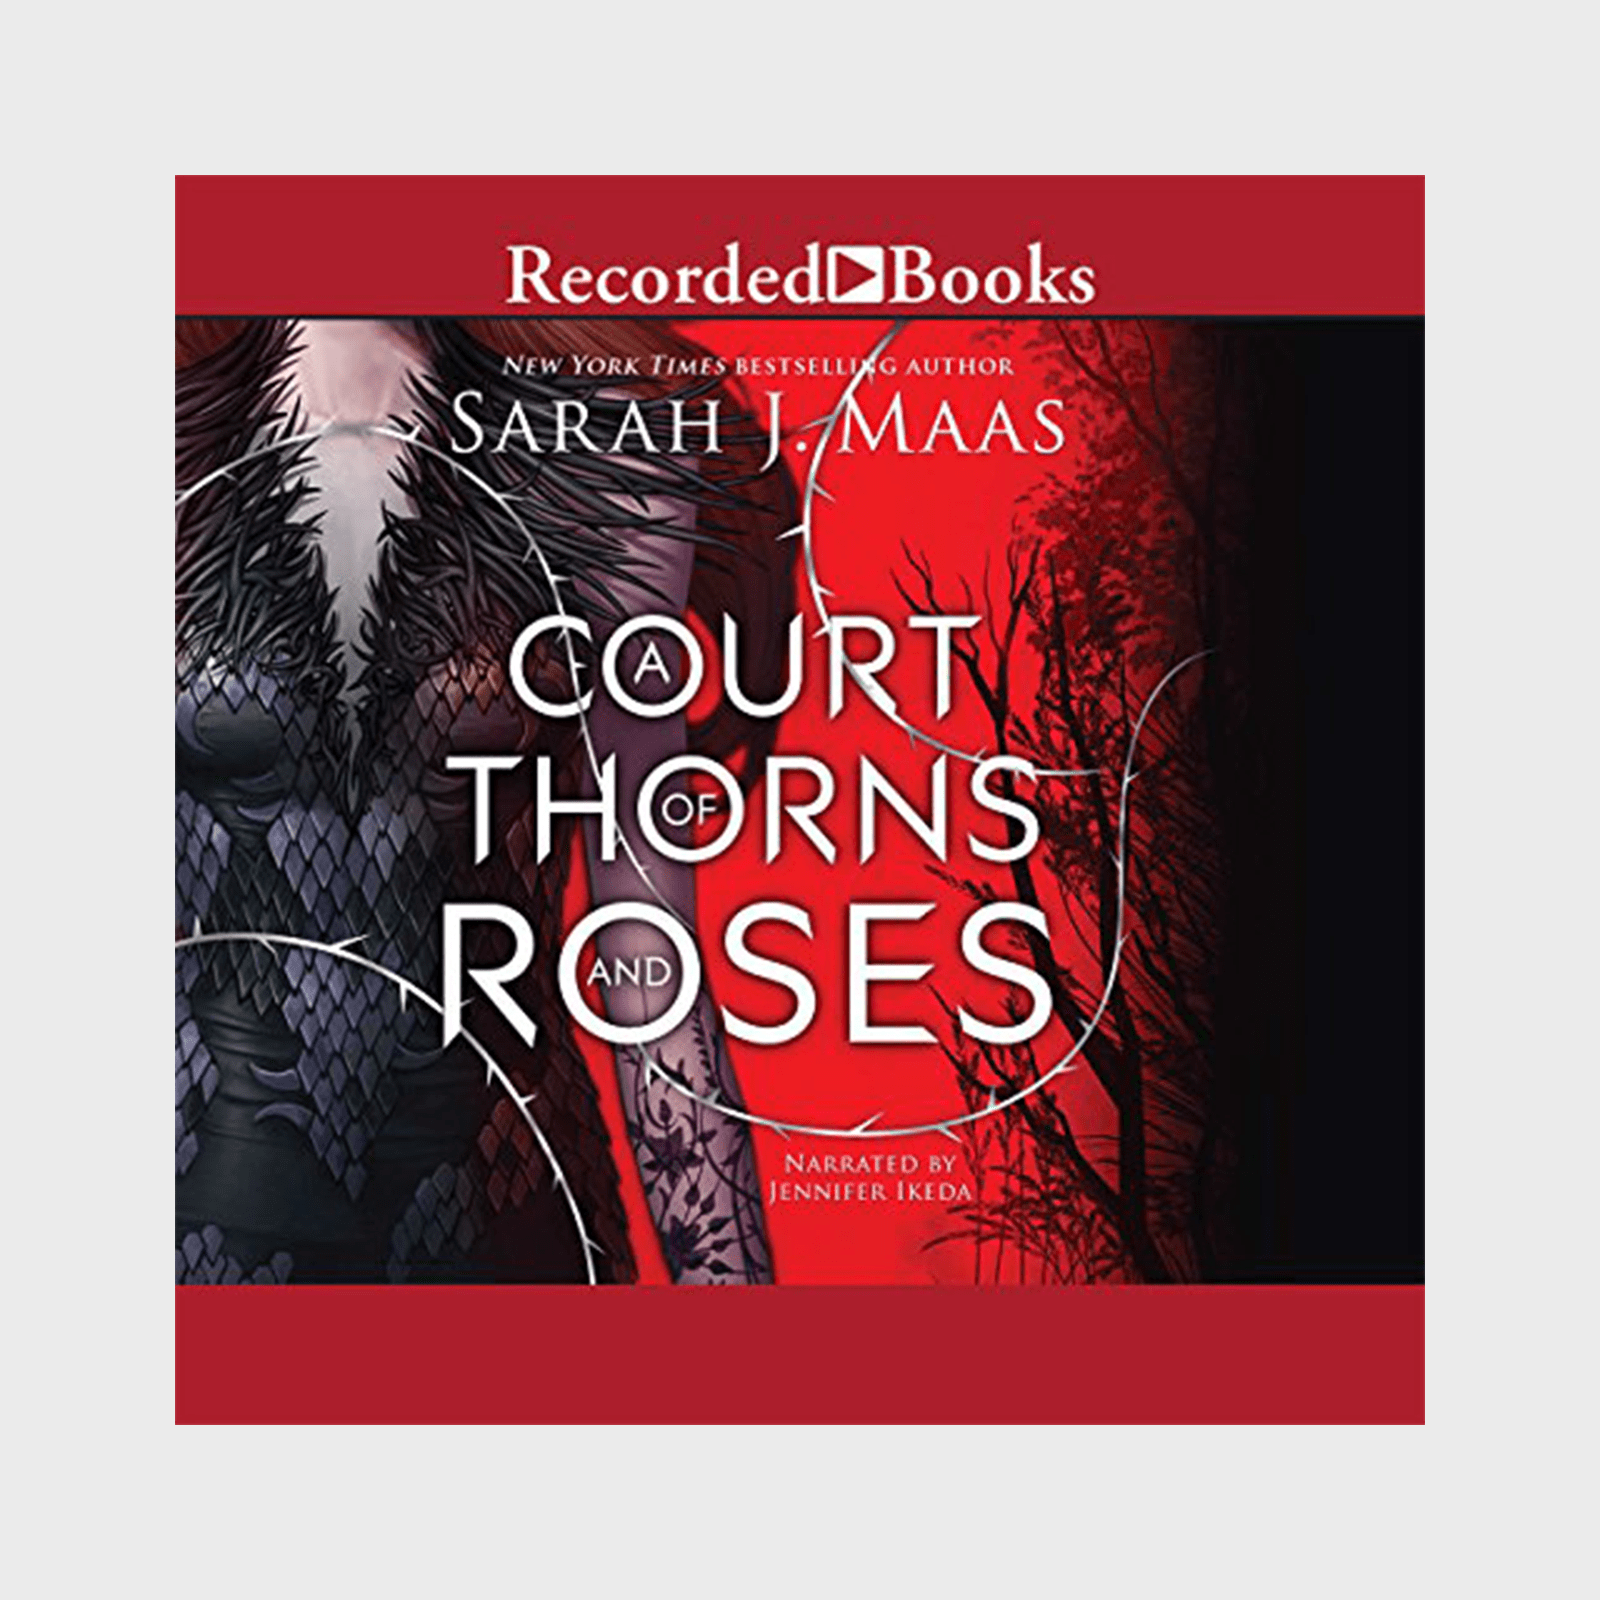 <h3 class=""><strong><em>A Court of Thorns and Roses</em> by Sarah J. Maas</strong></h3> <p>Whether you're lover of <a href="https://www.rd.com/list/the-best-fantasy-books/" rel="noopener noreferrer">fantasy books</a> or have never before mingled with any high fae, <a href="https://www.amazon.com/A-Court-of-Thorns-and-Roses-audiobook/dp/B00WXS68T4/" rel="noopener noreferrer"><em>A Court of Thorns and Roses</em></a> is a must-read. In this novel, loosely based on <em>Beauty and the Beast</em>, readers will meet Feyre, a 19-year-old huntress whose skills are the only things keeping her family alive. But trouble comes to her cabin after she kills a wolf during one of her hunts—which wasn't a wolf at all, but rather a shape-shifting faerie whose high lord comes and steals her away as retribution. She finds herself captive at the cursed Spring Court, ruled by the immortal and beautiful Tamlin. As Feyre adapts to his world, her feelings for him turn from hostility to passion, and she'll do anything she can to break the curse—or risk losing him forever.</p> <p class="listicle-page__cta-button-shop"><a class="shop-btn" href="https://www.amazon.com/A-Court-of-Thorns-and-Roses-audiobook/dp/B00WXS68T4/">Shop Now</a></p>